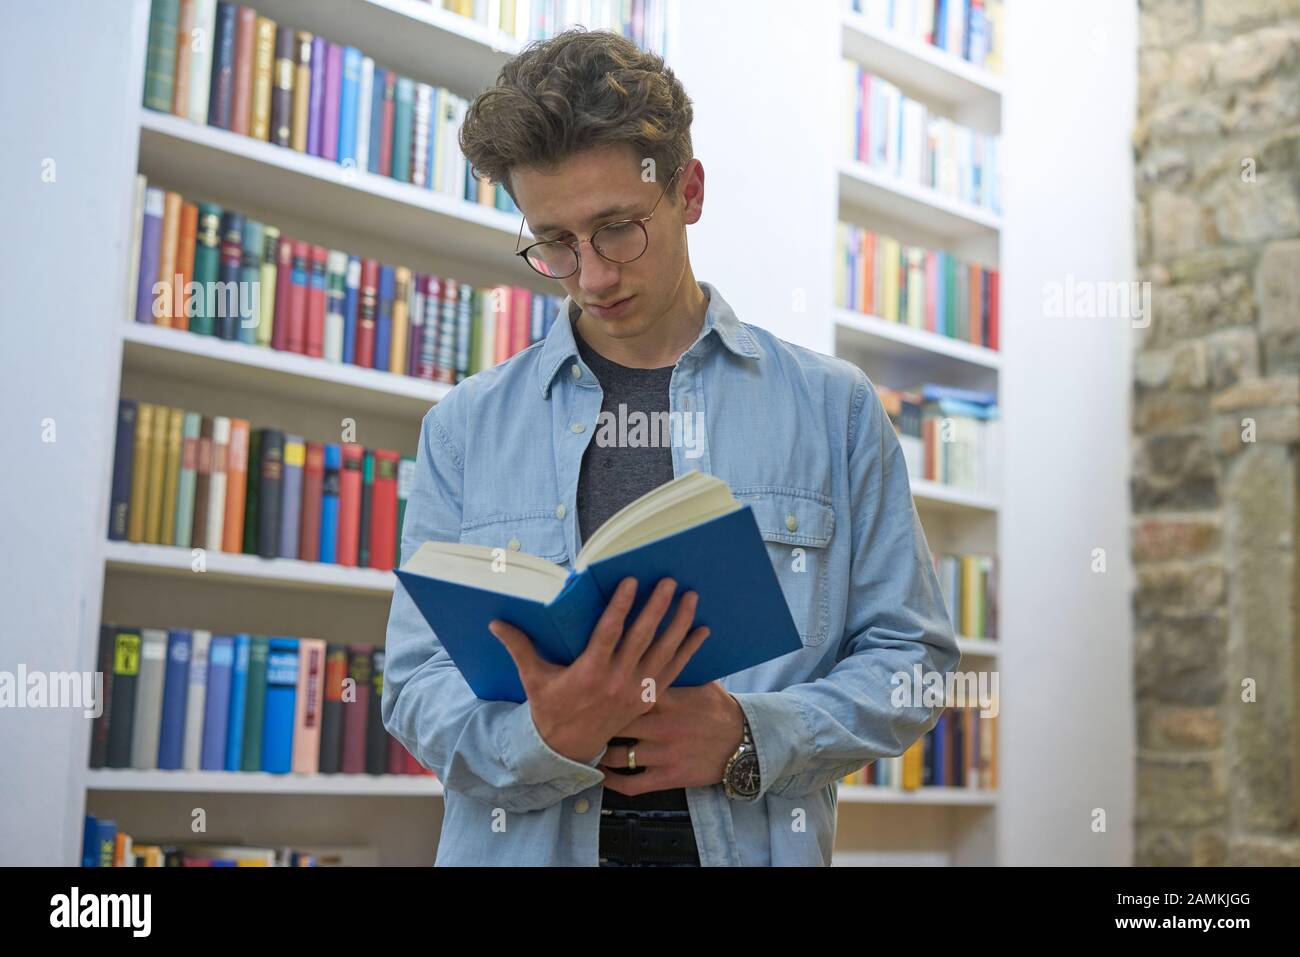 Young student with curls focussed on reading a book and standing  next to a bookshelf Stock Photo